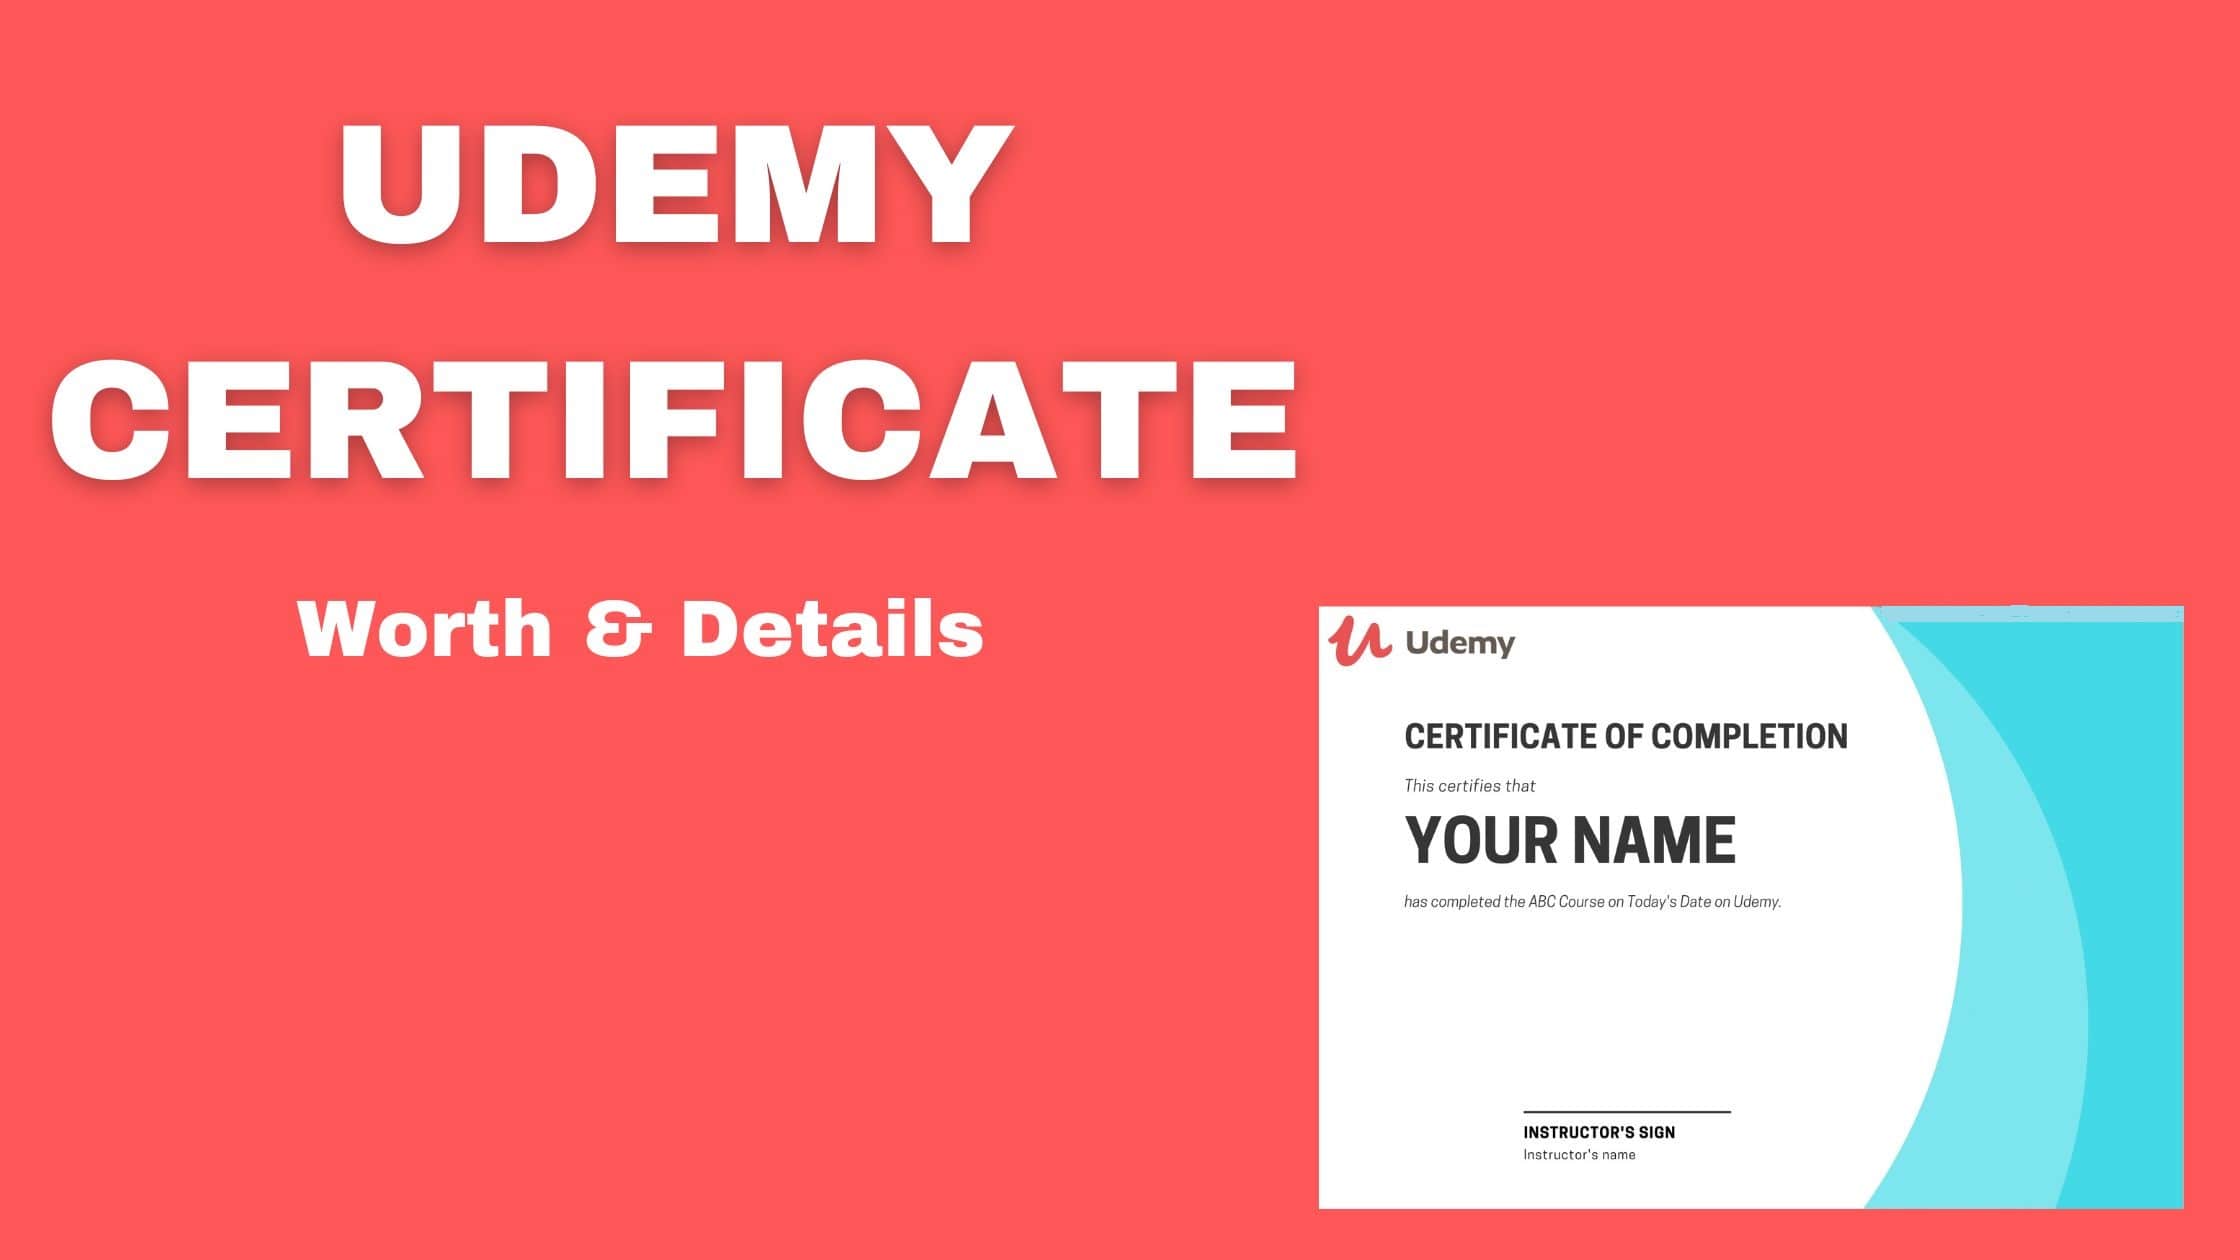 Udemy Certificate: Everything You Need To Know